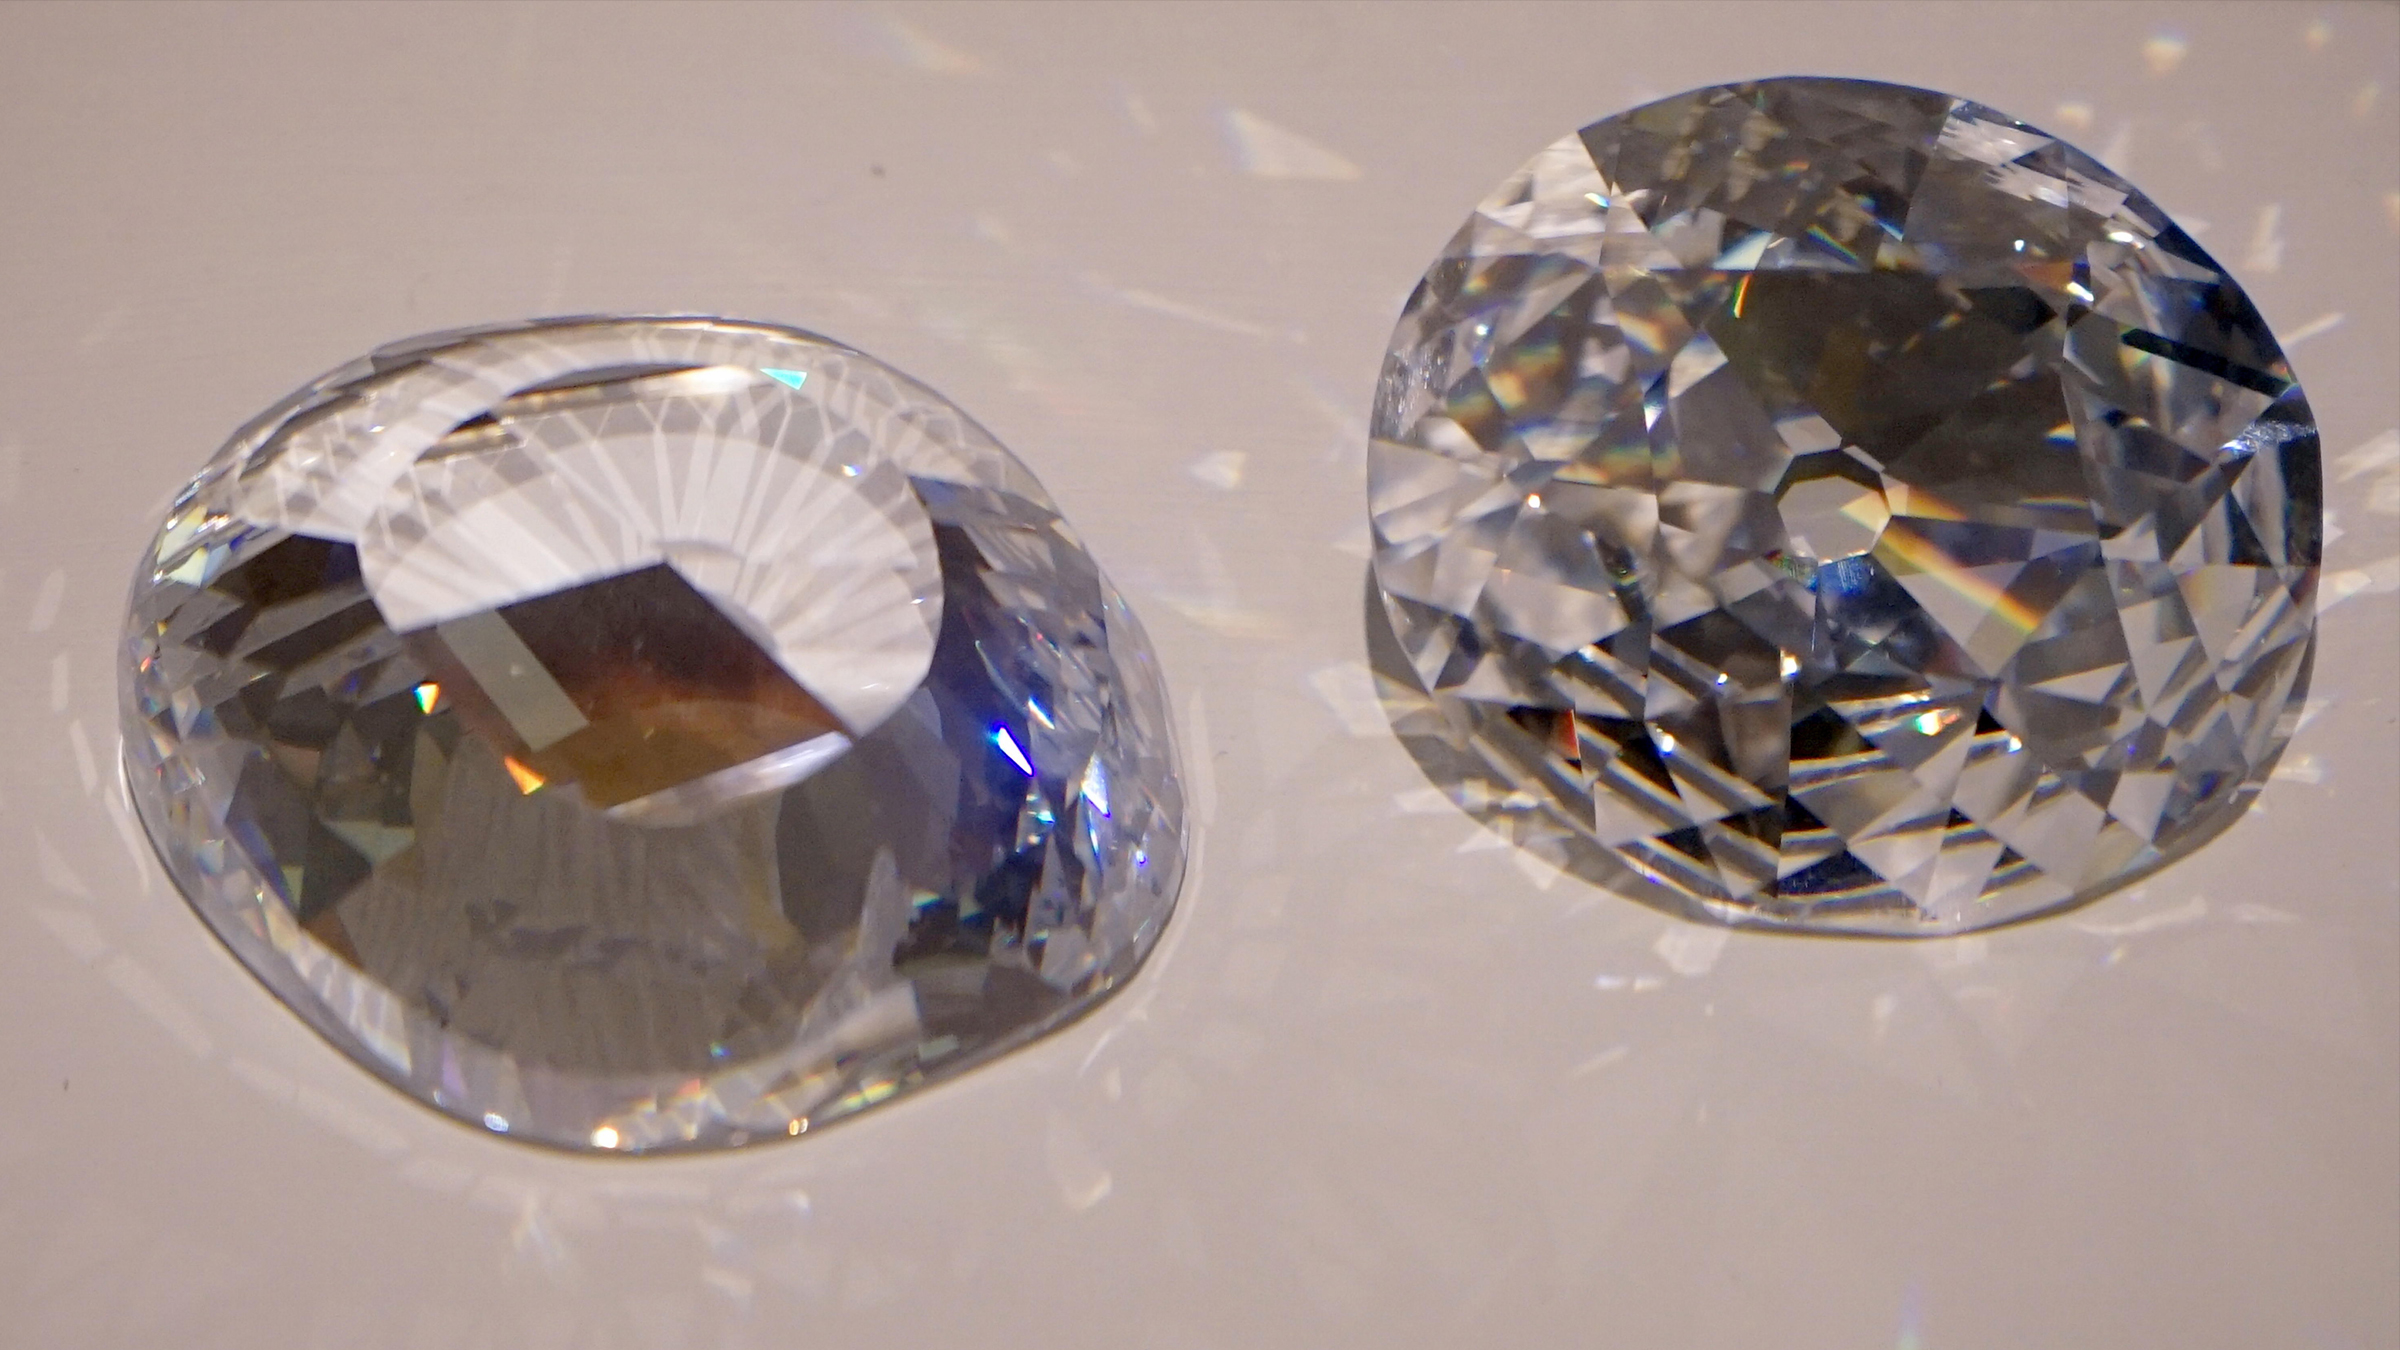 scientists may have pinpointed the true origin of the hope diamond and other pristine gemstones